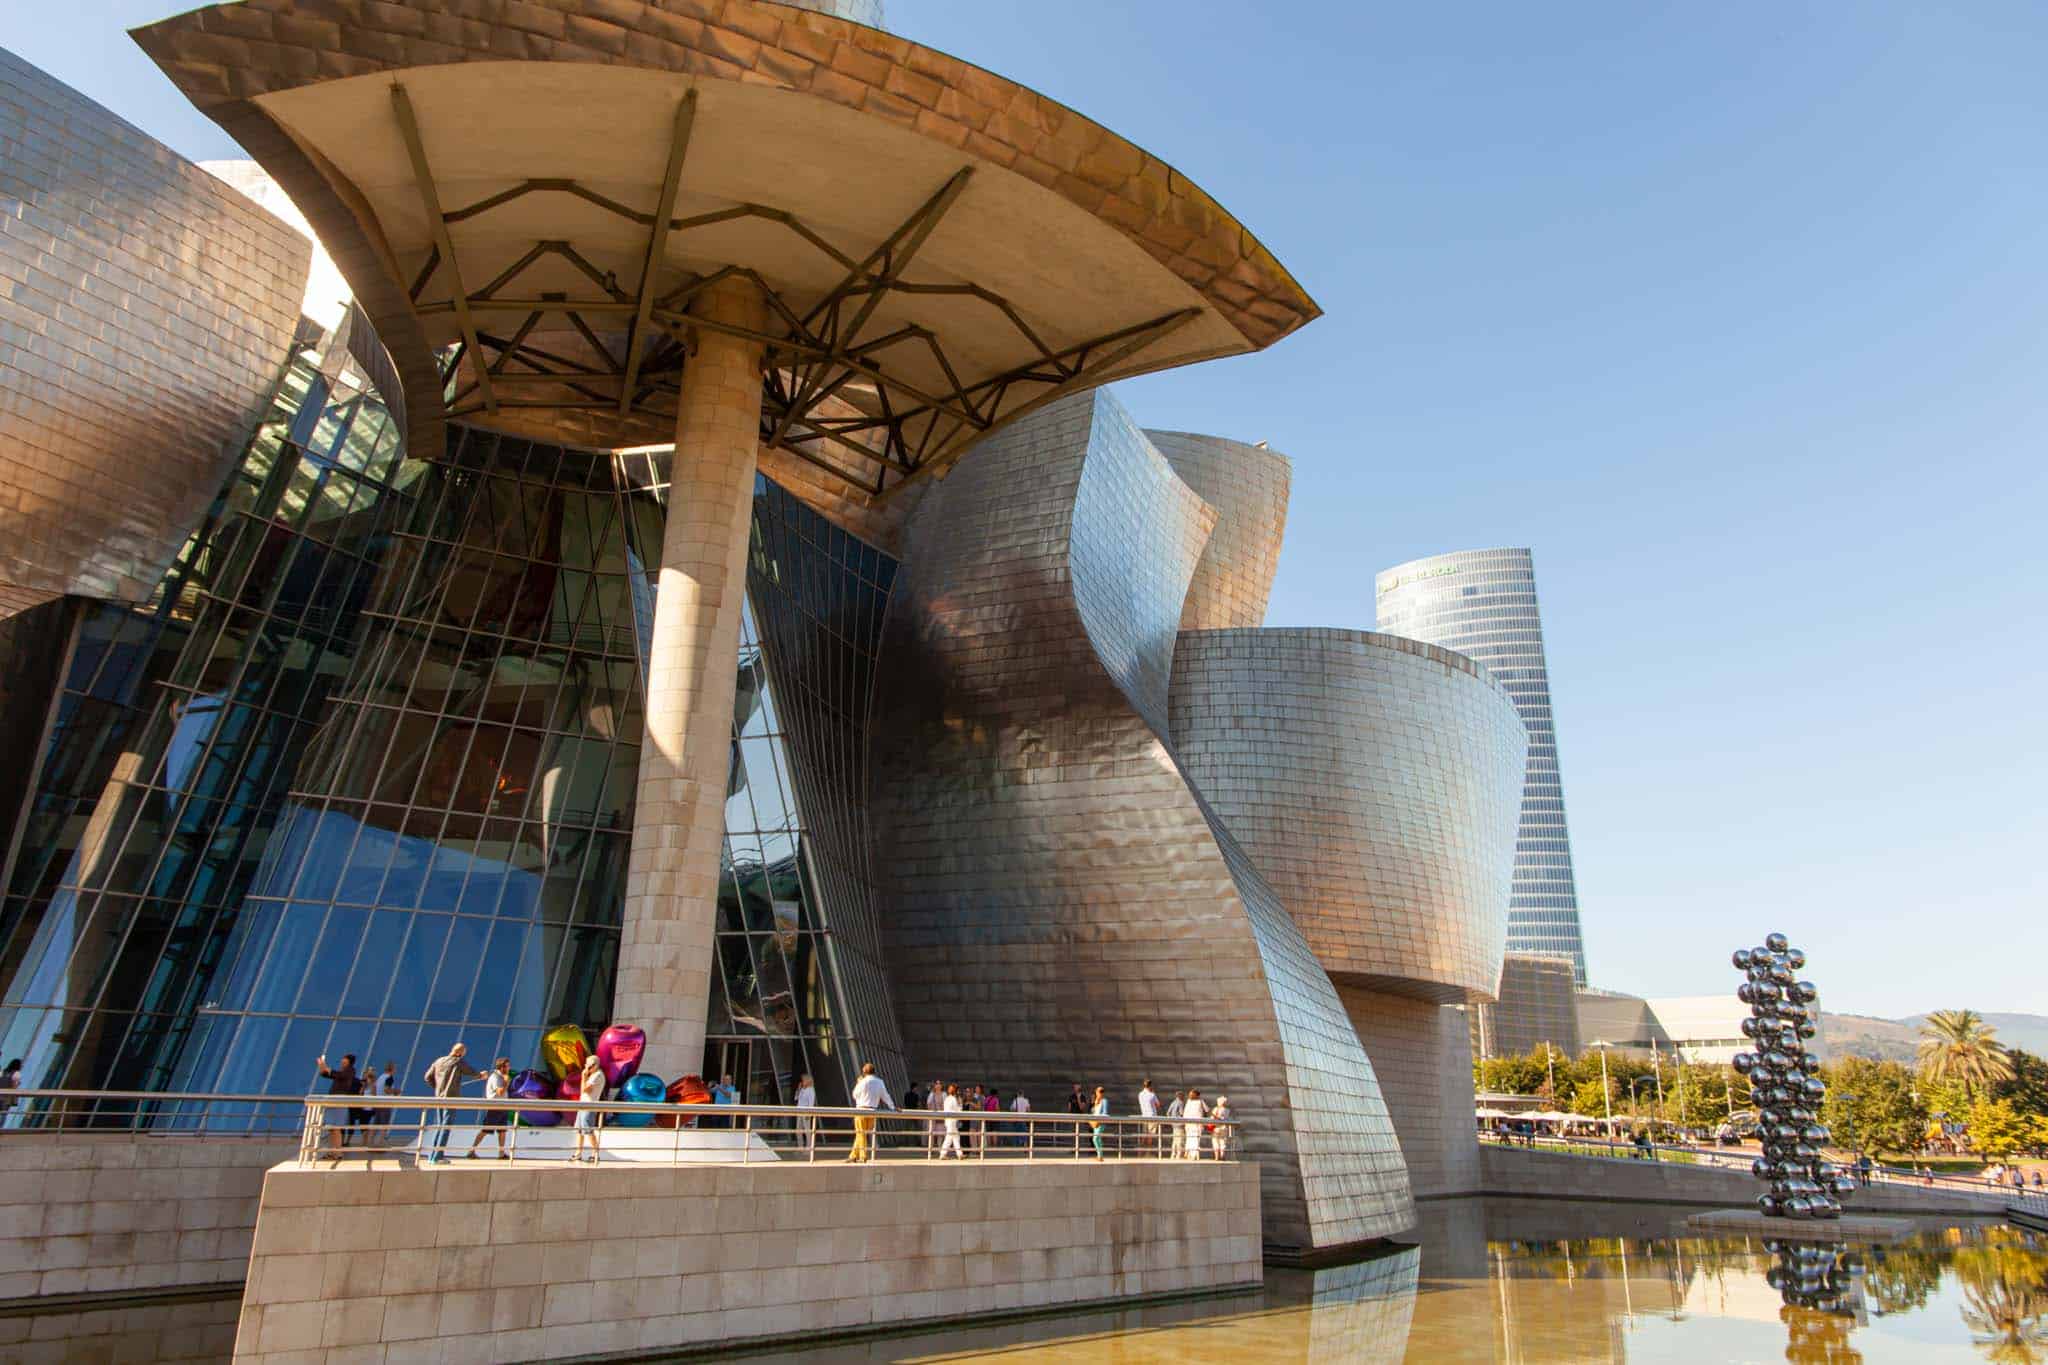 The modern looking Guggenheim museum in Bilbao Gu, one of the best places to visit in Spain